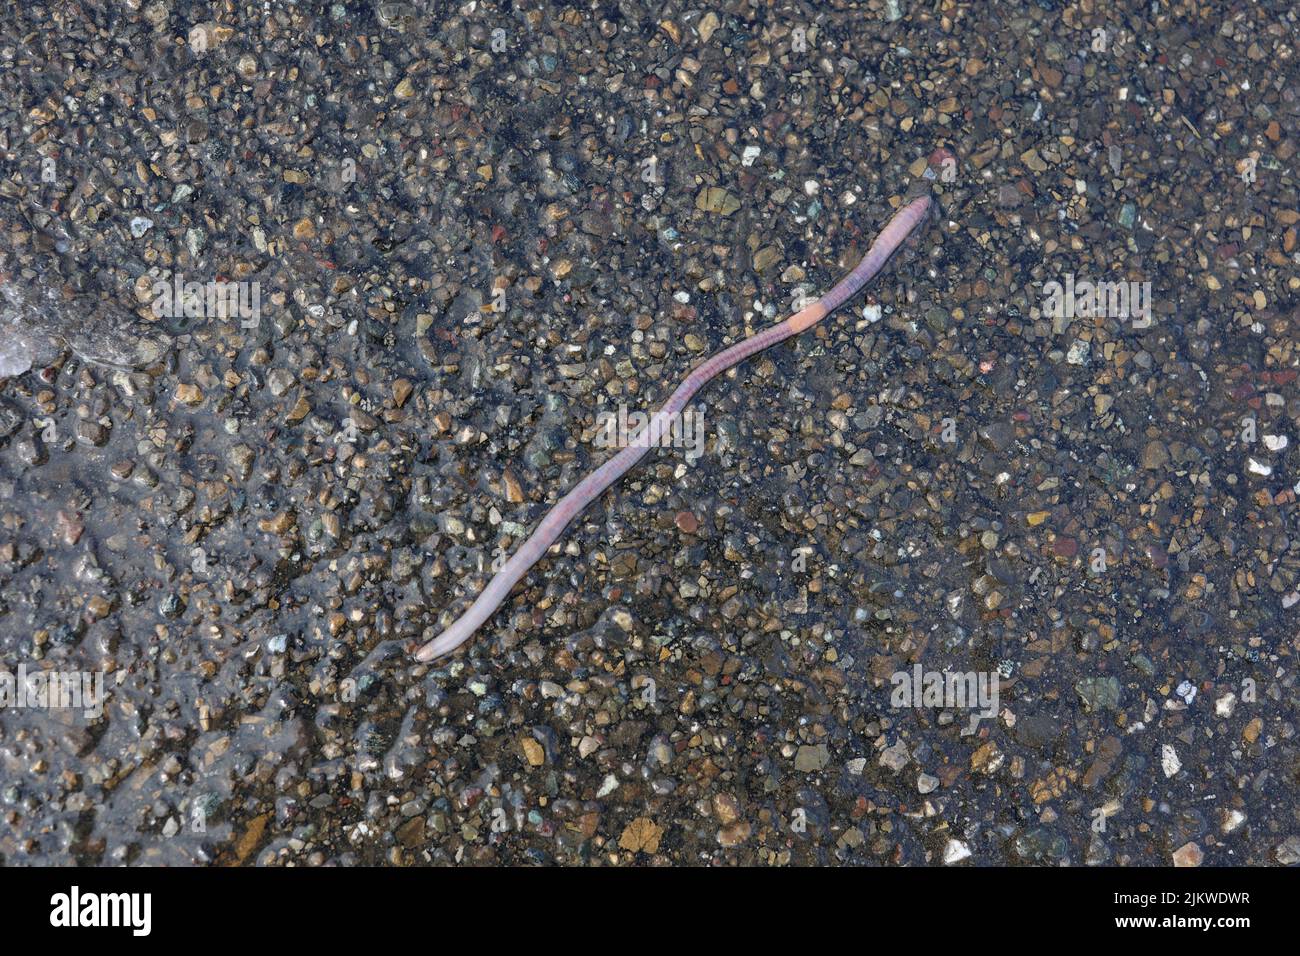 Earthworm after the rain crawled out on the asphalt. Stock Photo